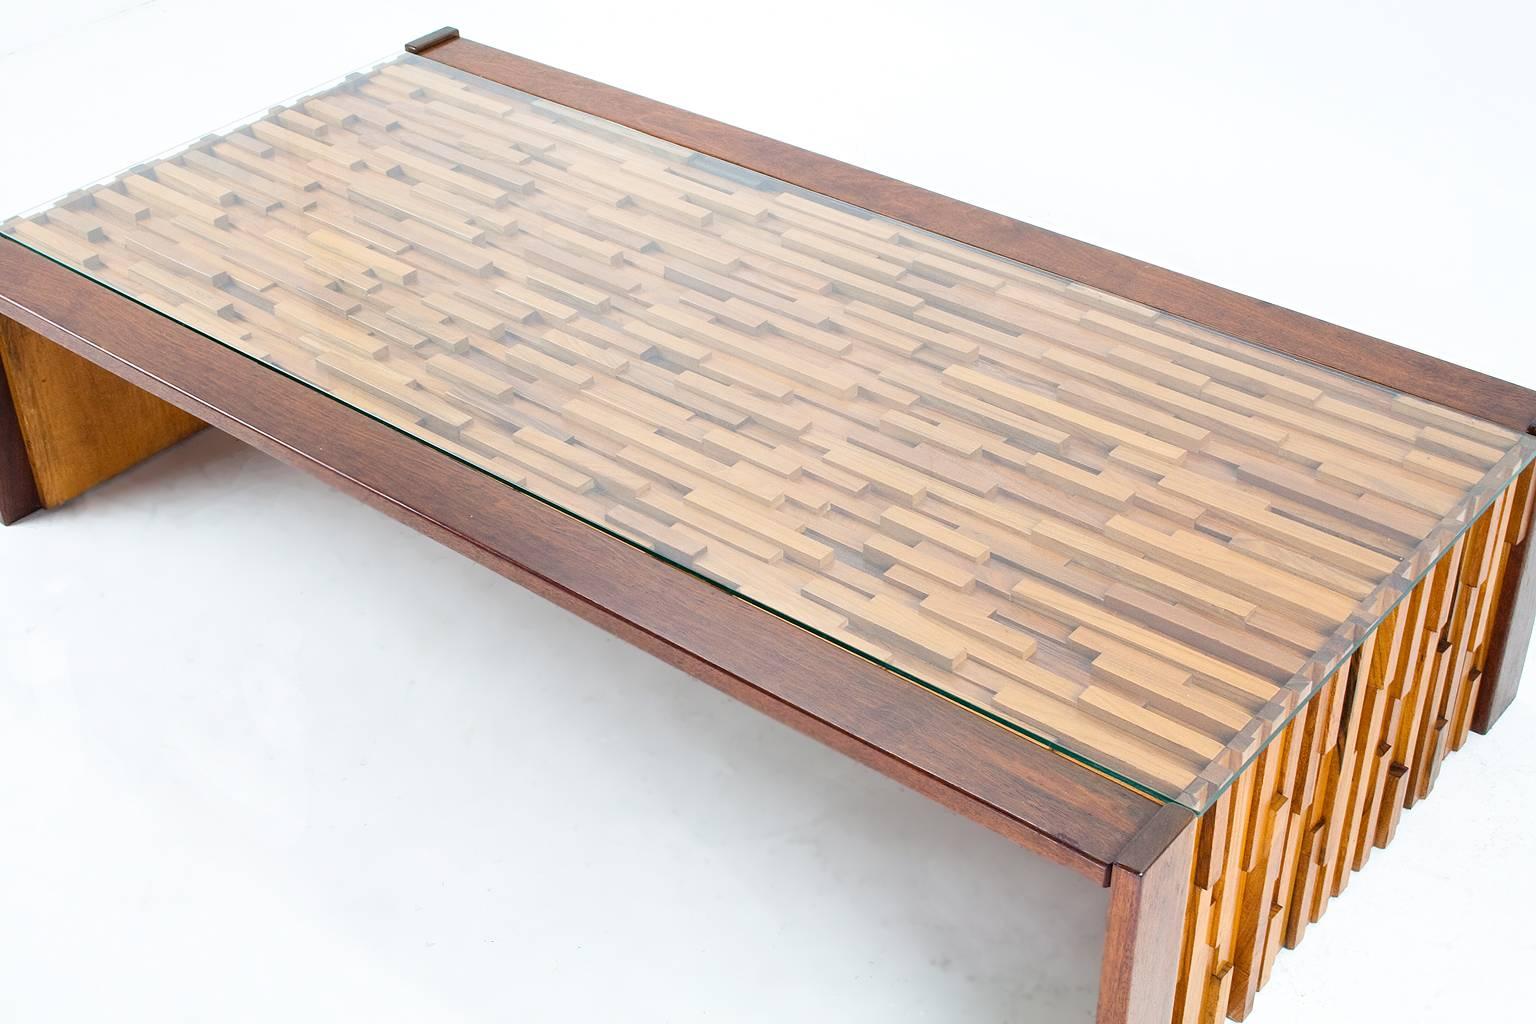 A large (149 x 76.5 cm) Brutalist Jacaranda wooden coffee table by Brazilian designer Percival Lafer, 1960s. A tropical mix of wooden slats. The piece is in very good condition. The glass only has slight traces of use, the table is in very good and